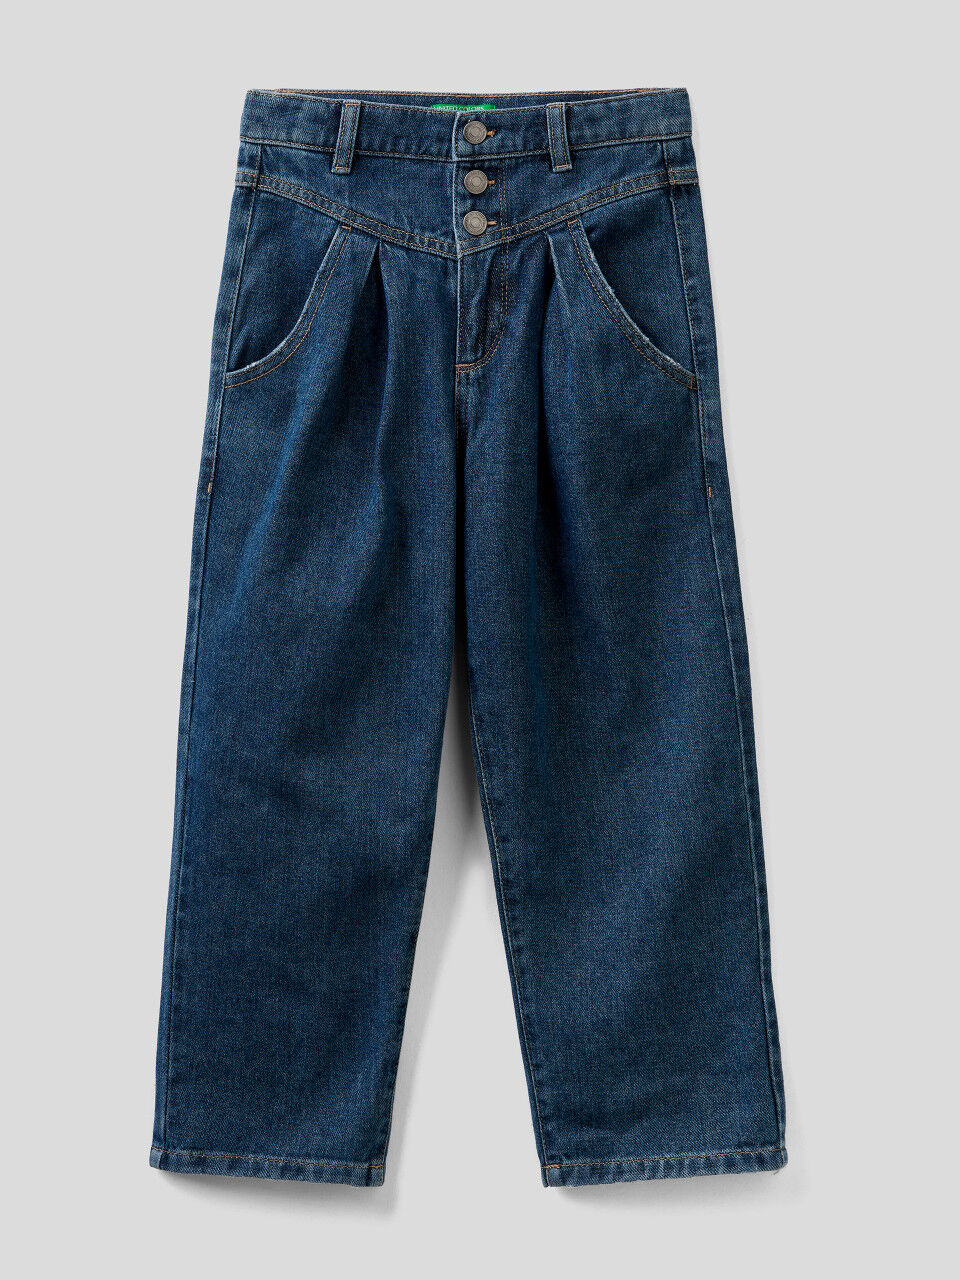 Slouchy jeans in "Eco-Recycle" denim